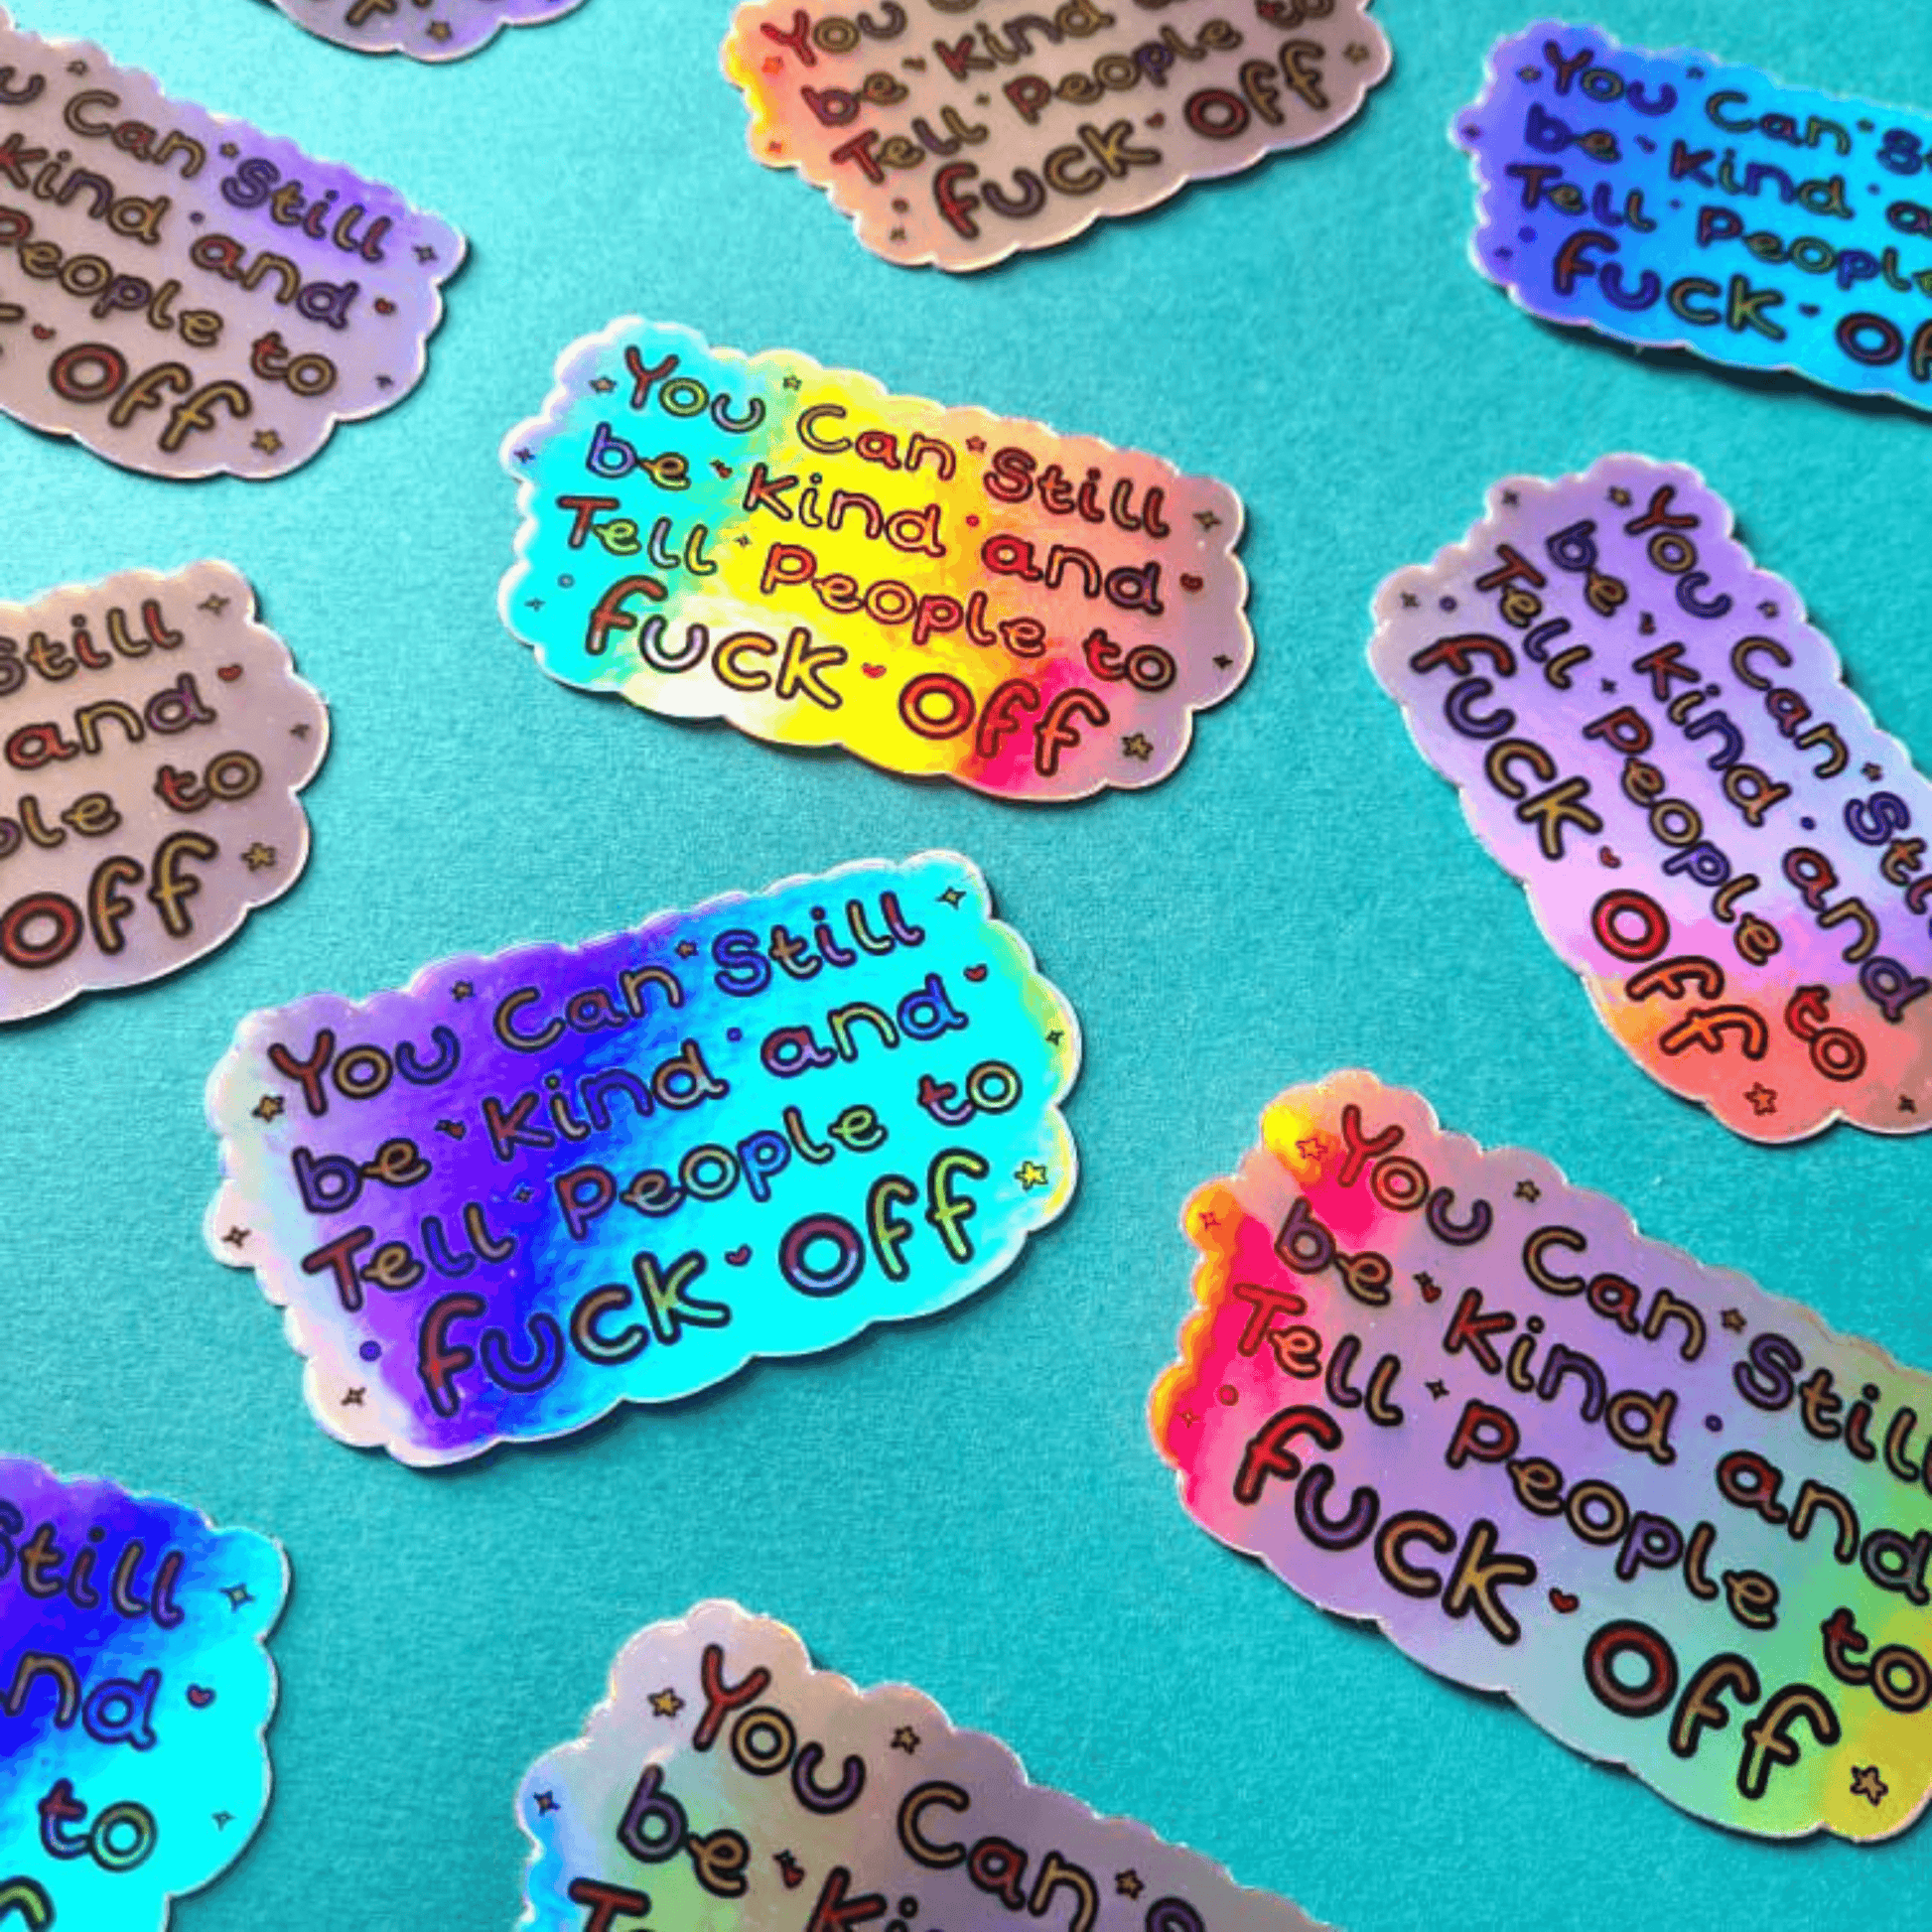 Multiple You Can Still be Kind and Tell People to F**k Off Stickers on a blue background. The sticker is holographic with rainbow writing with sparkles, hearts, stars and circles.